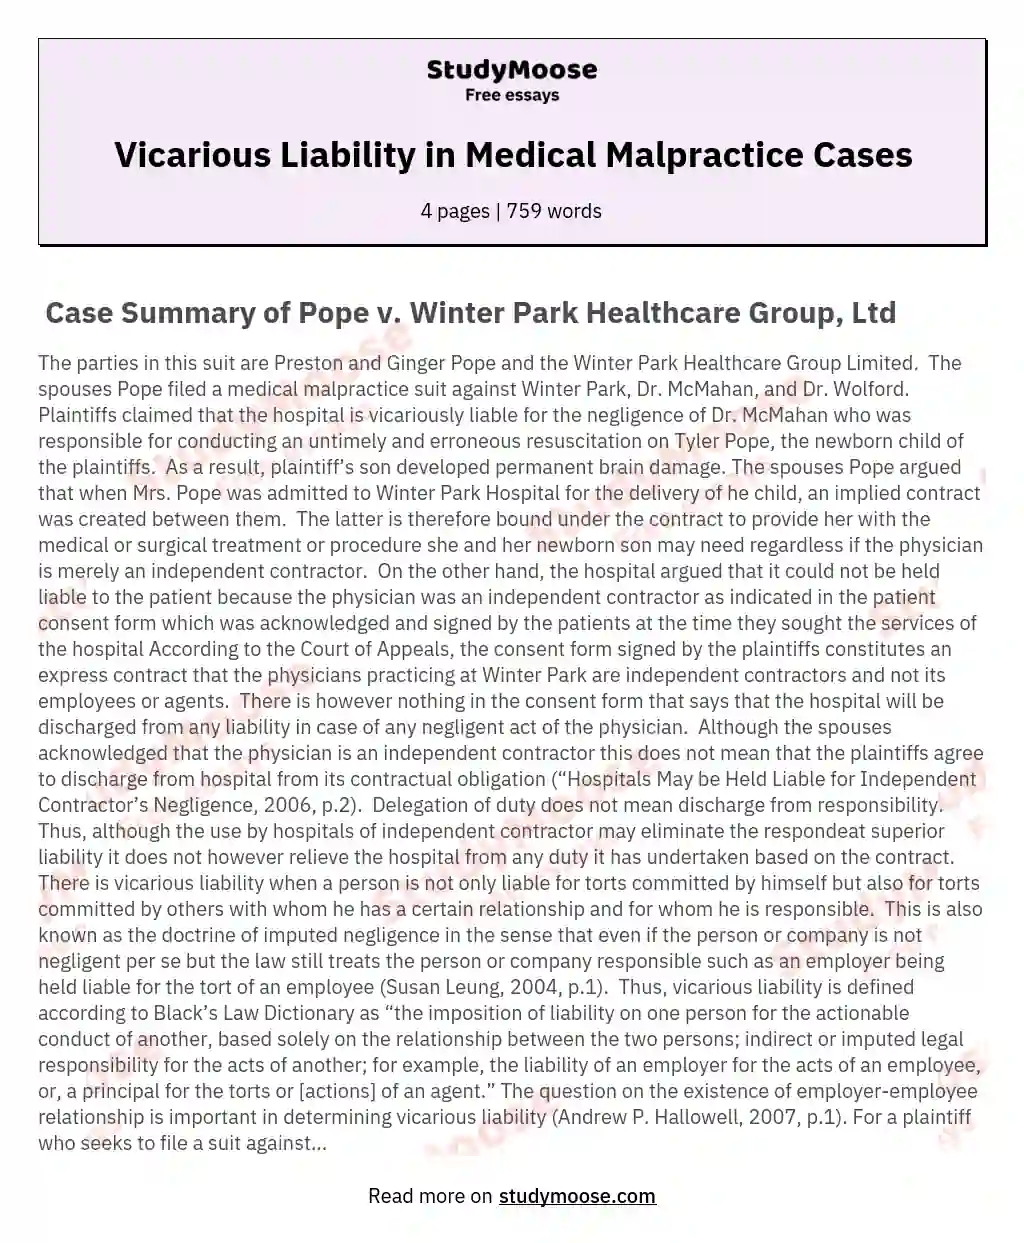 Vicarious Liability in Medical Malpractice Cases essay